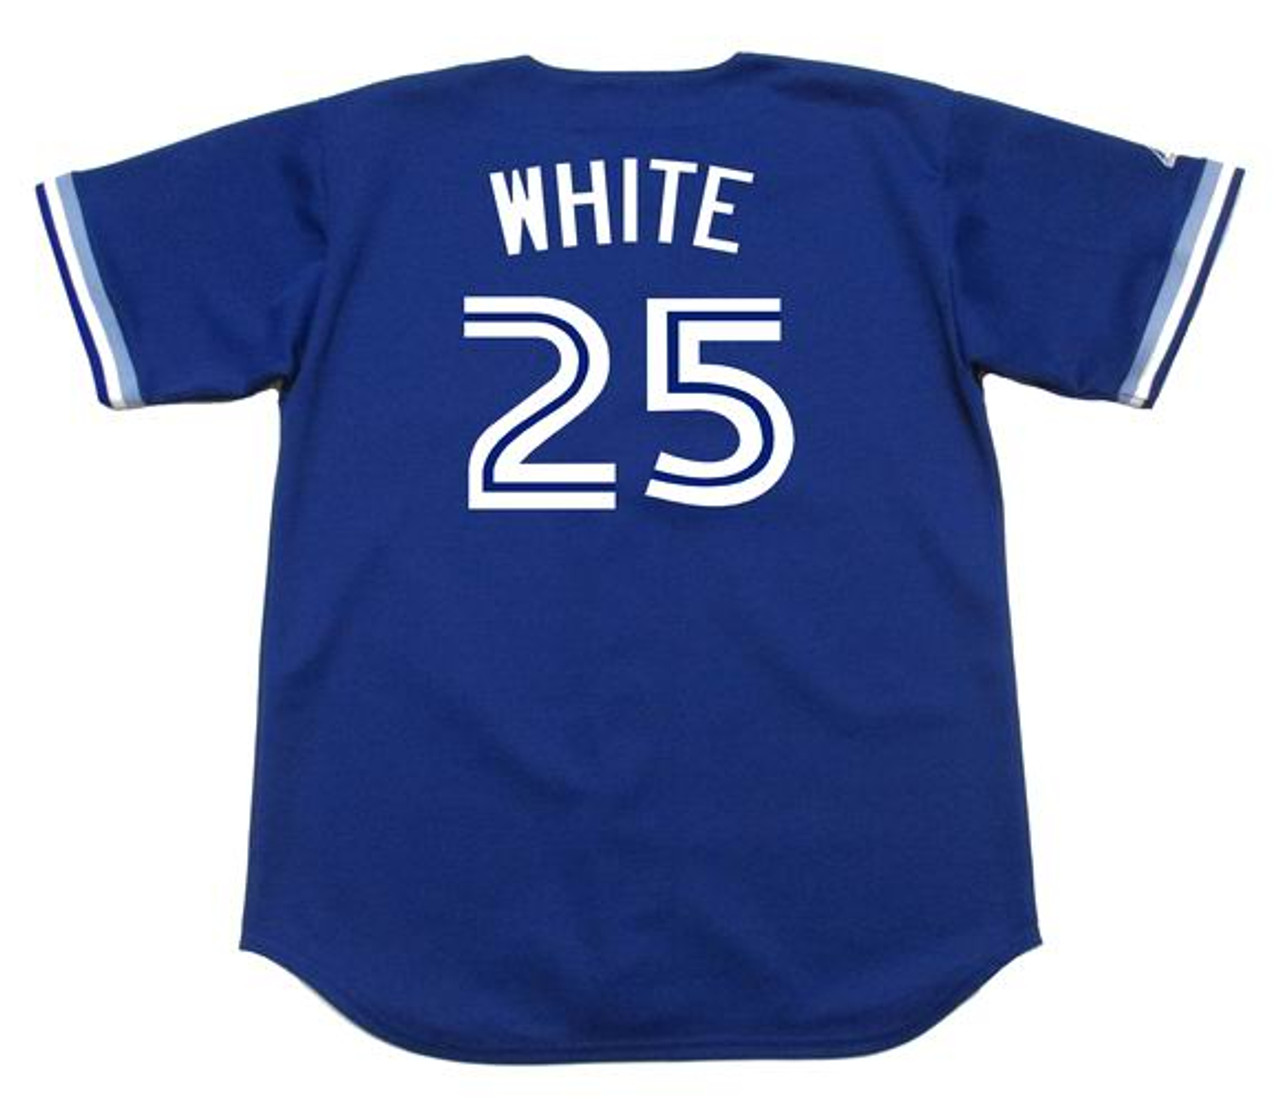 Toronto Blue Jays Home Pick-a-player Retired Roster Authentic Jersey -  White Custom Jerseys Mlb - Dingeas